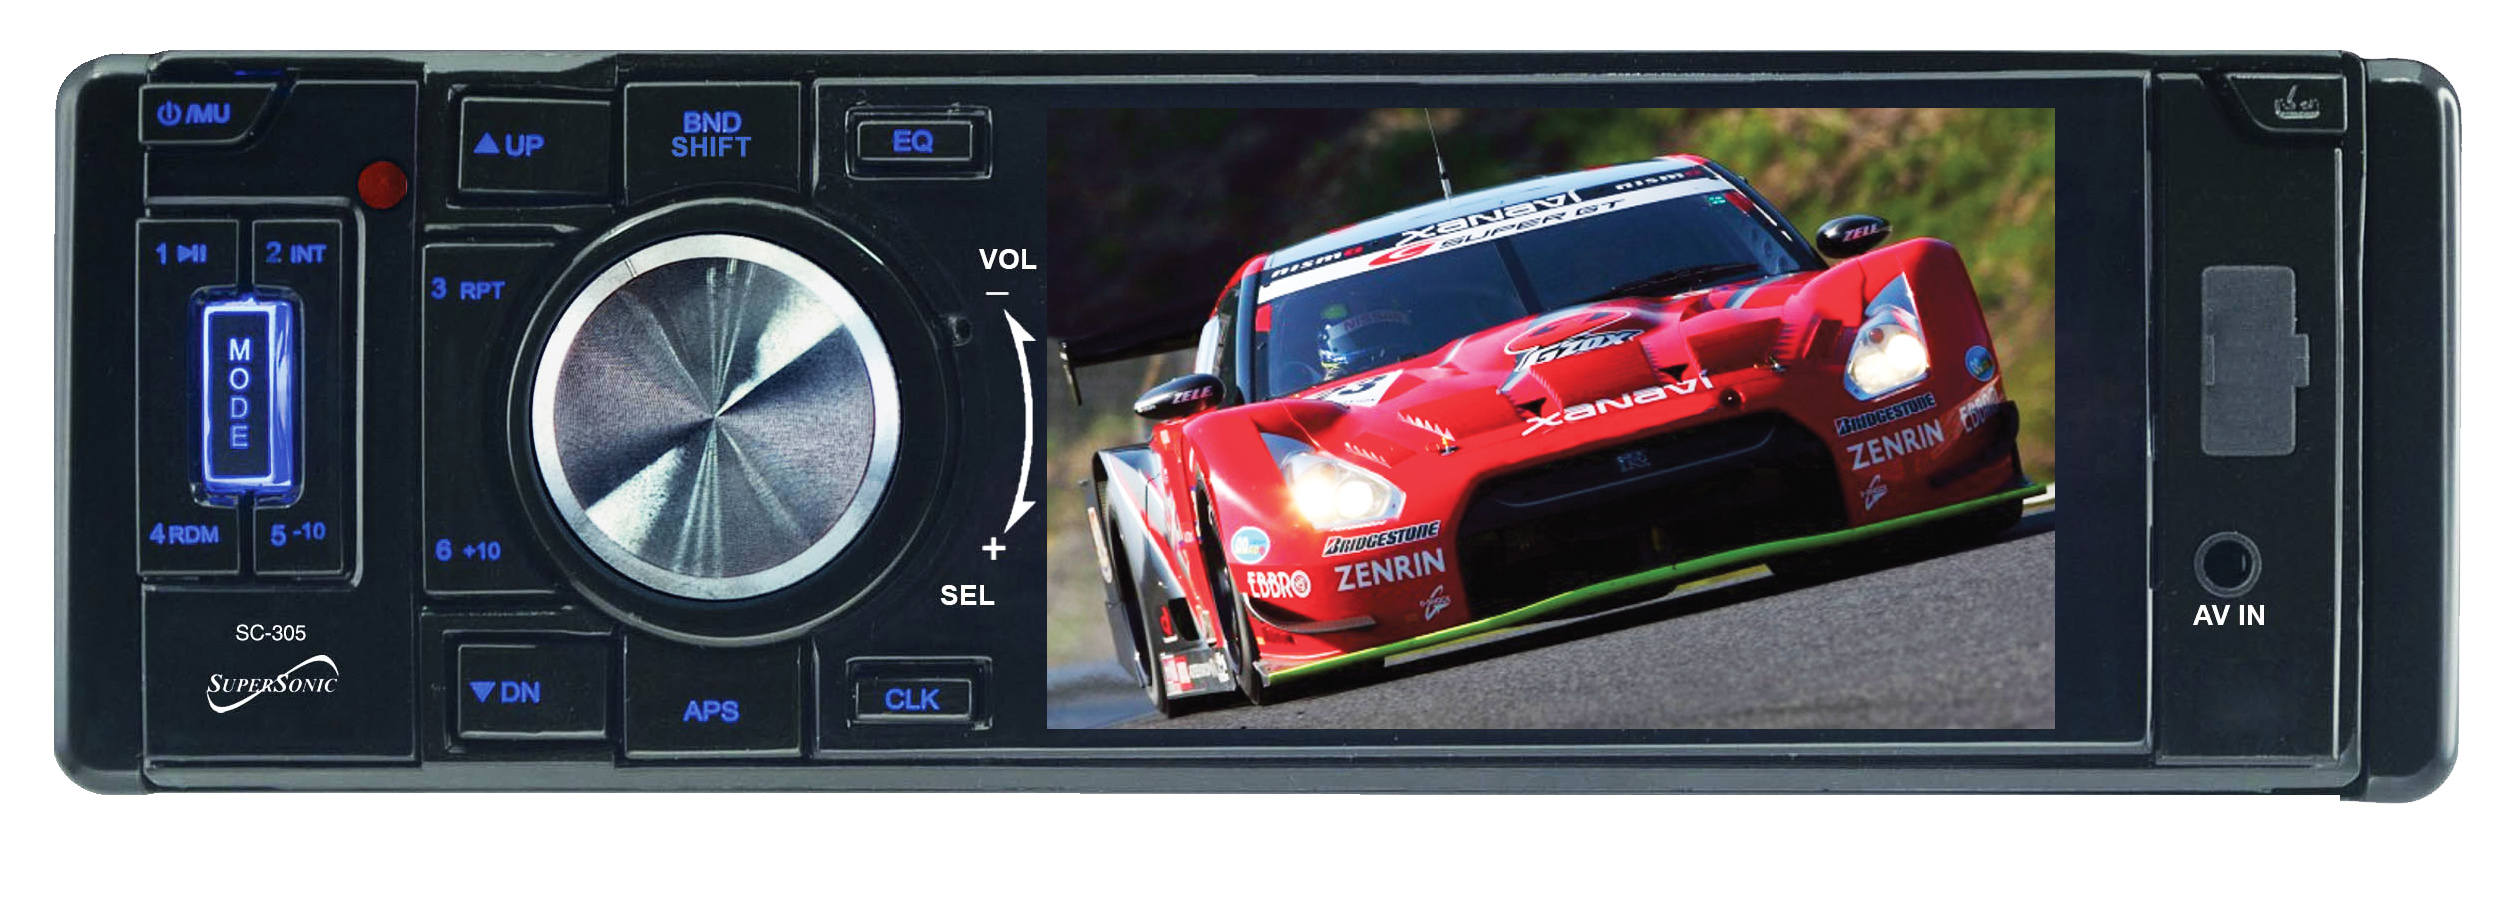 Supersonic SC-305 Car DVD Player, 3.5" LCD, Detachable Front Panel - image 2 of 2